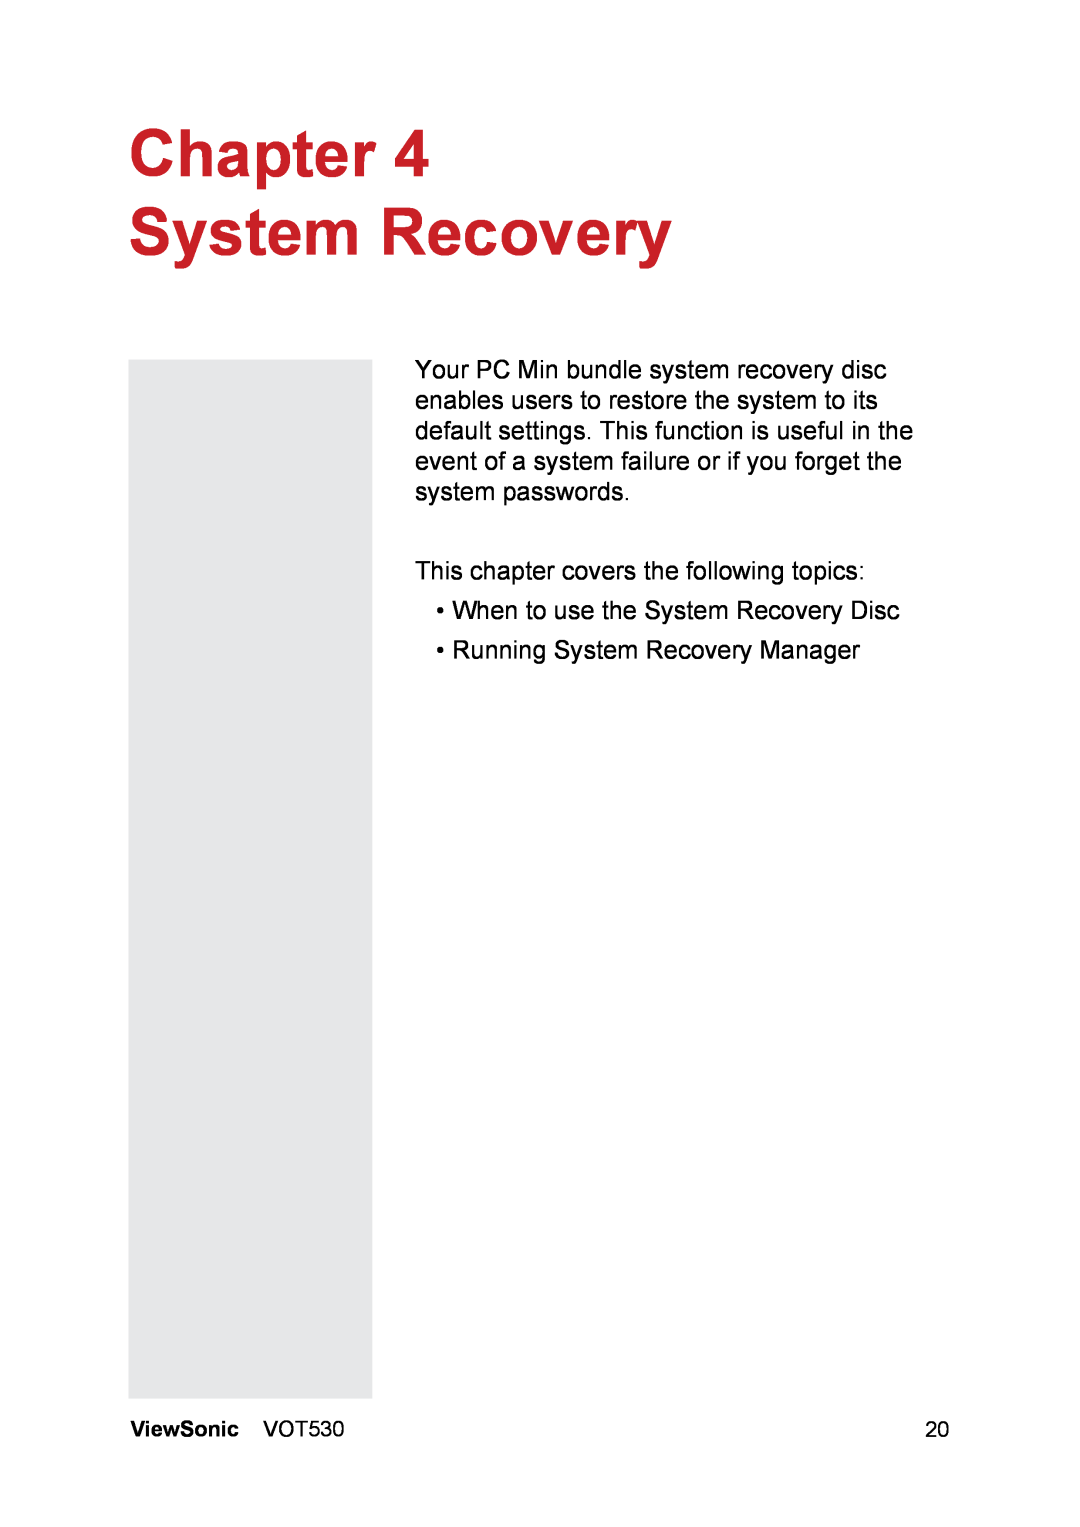 ViewSonic VS12661 manual Chapter System Recovery, Ths chapter covers the followng topcs, ViewSonic VOT530 